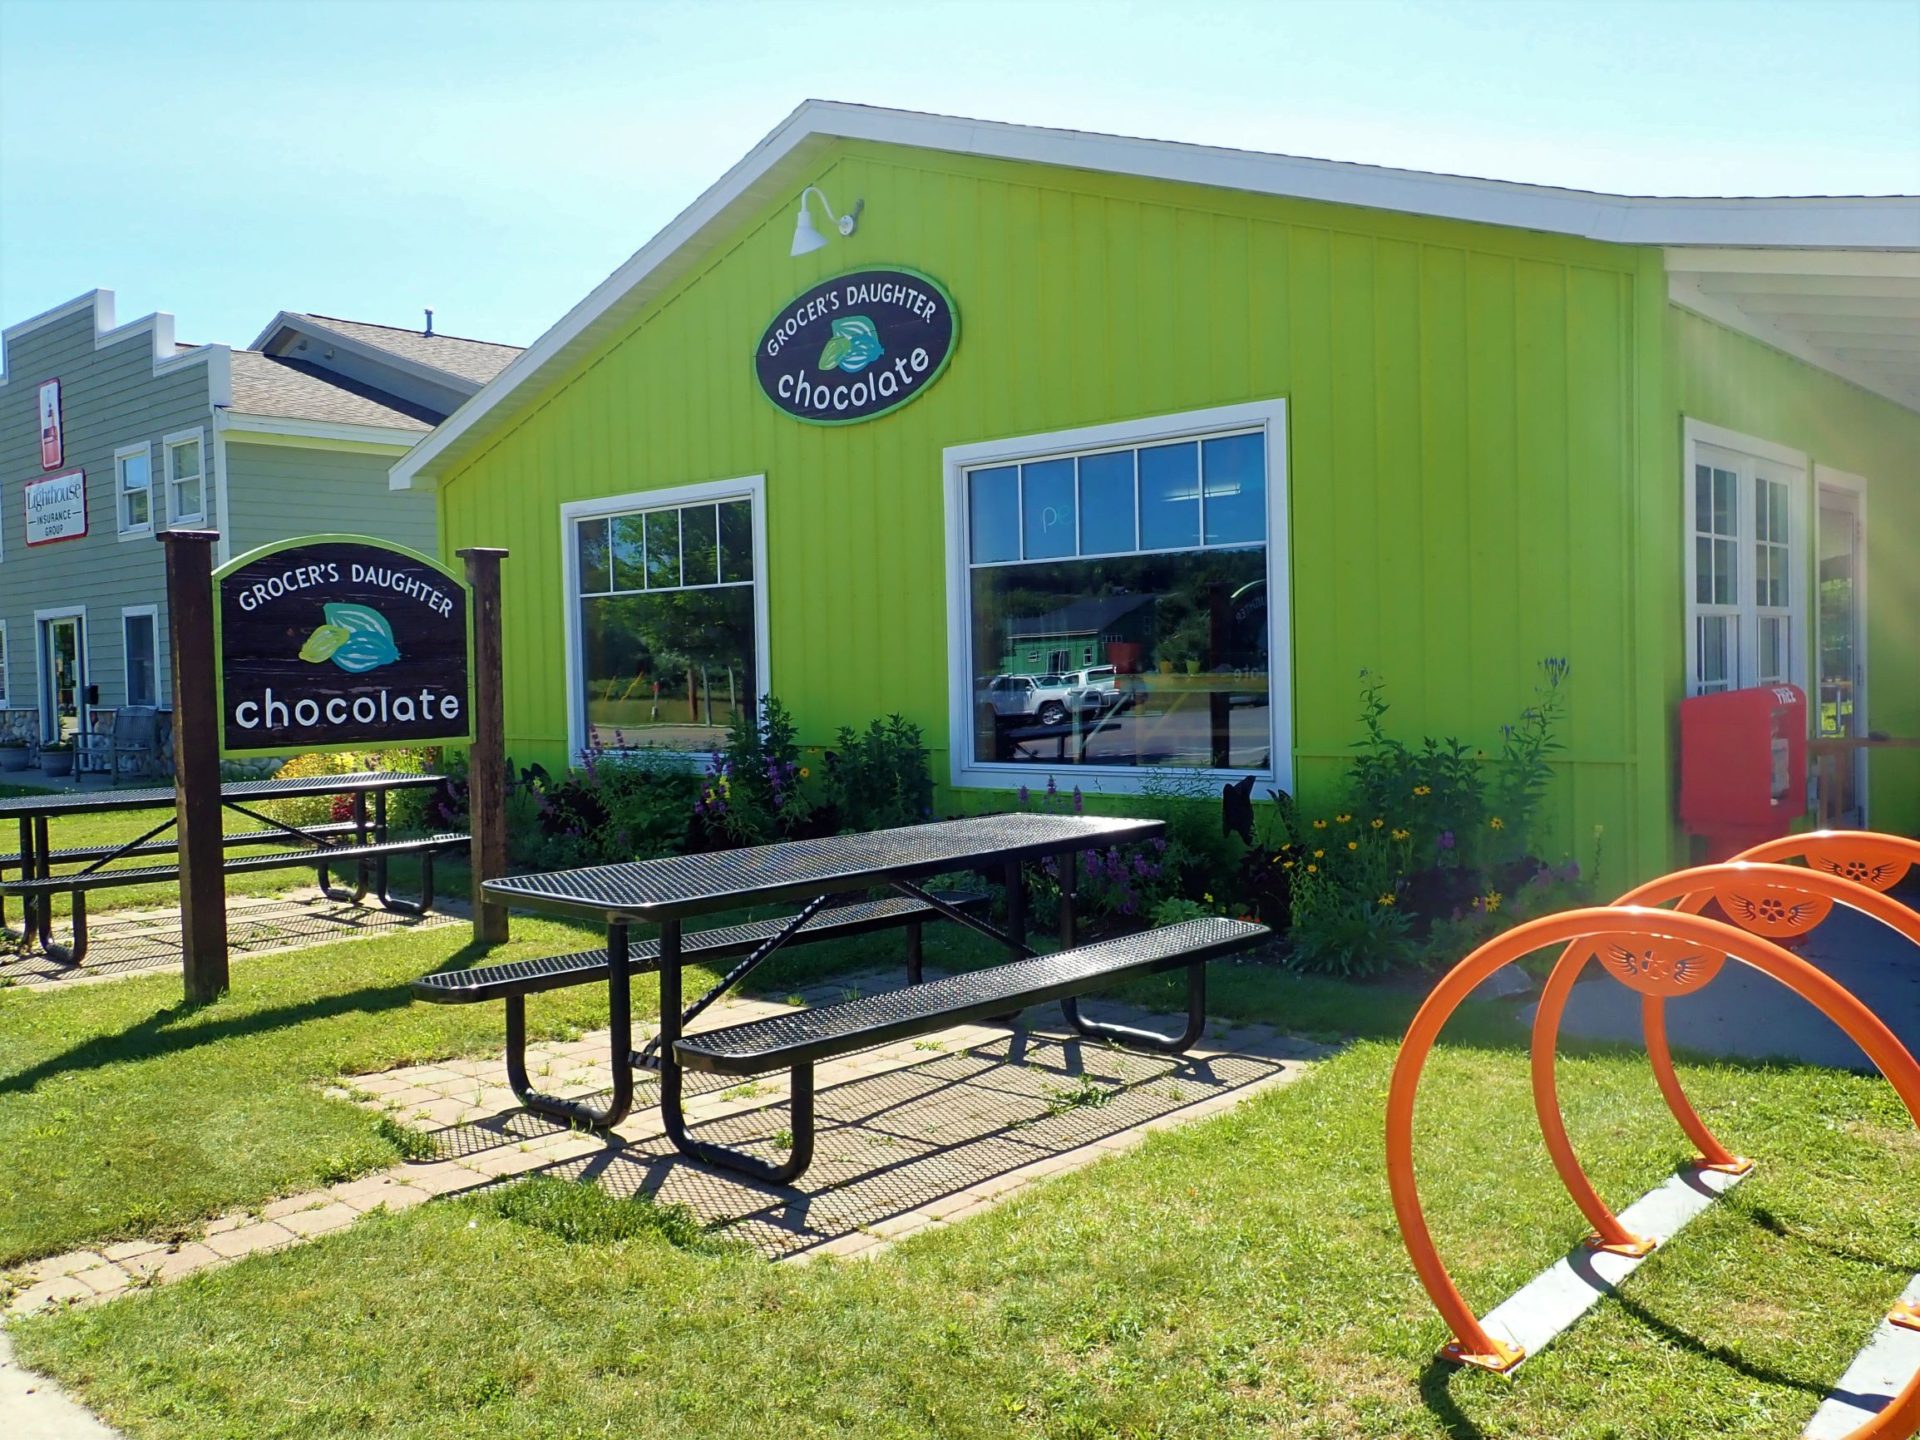 Grocer's Daughter Chocolate Shop in Northern Michigan